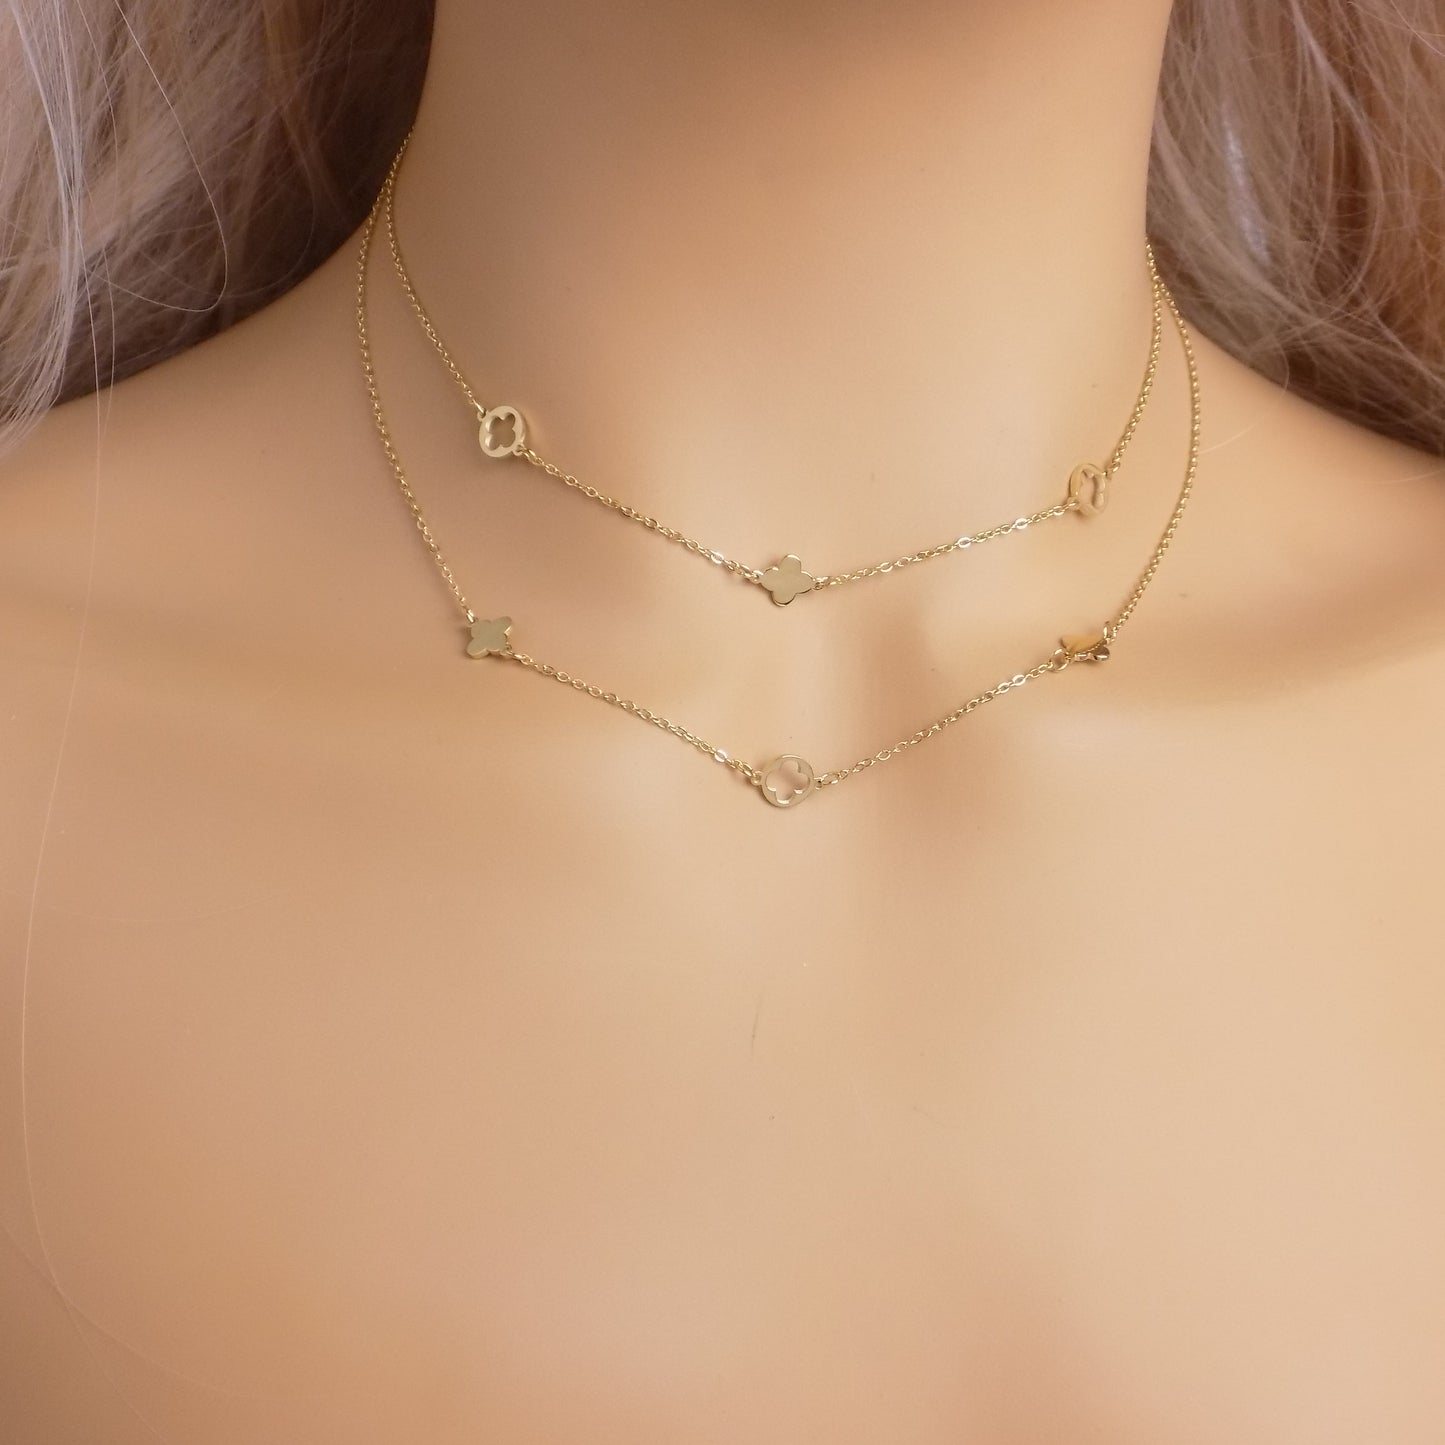 Double Strand Gold Minimalist Necklace with Clover Charms - Stainless Steel